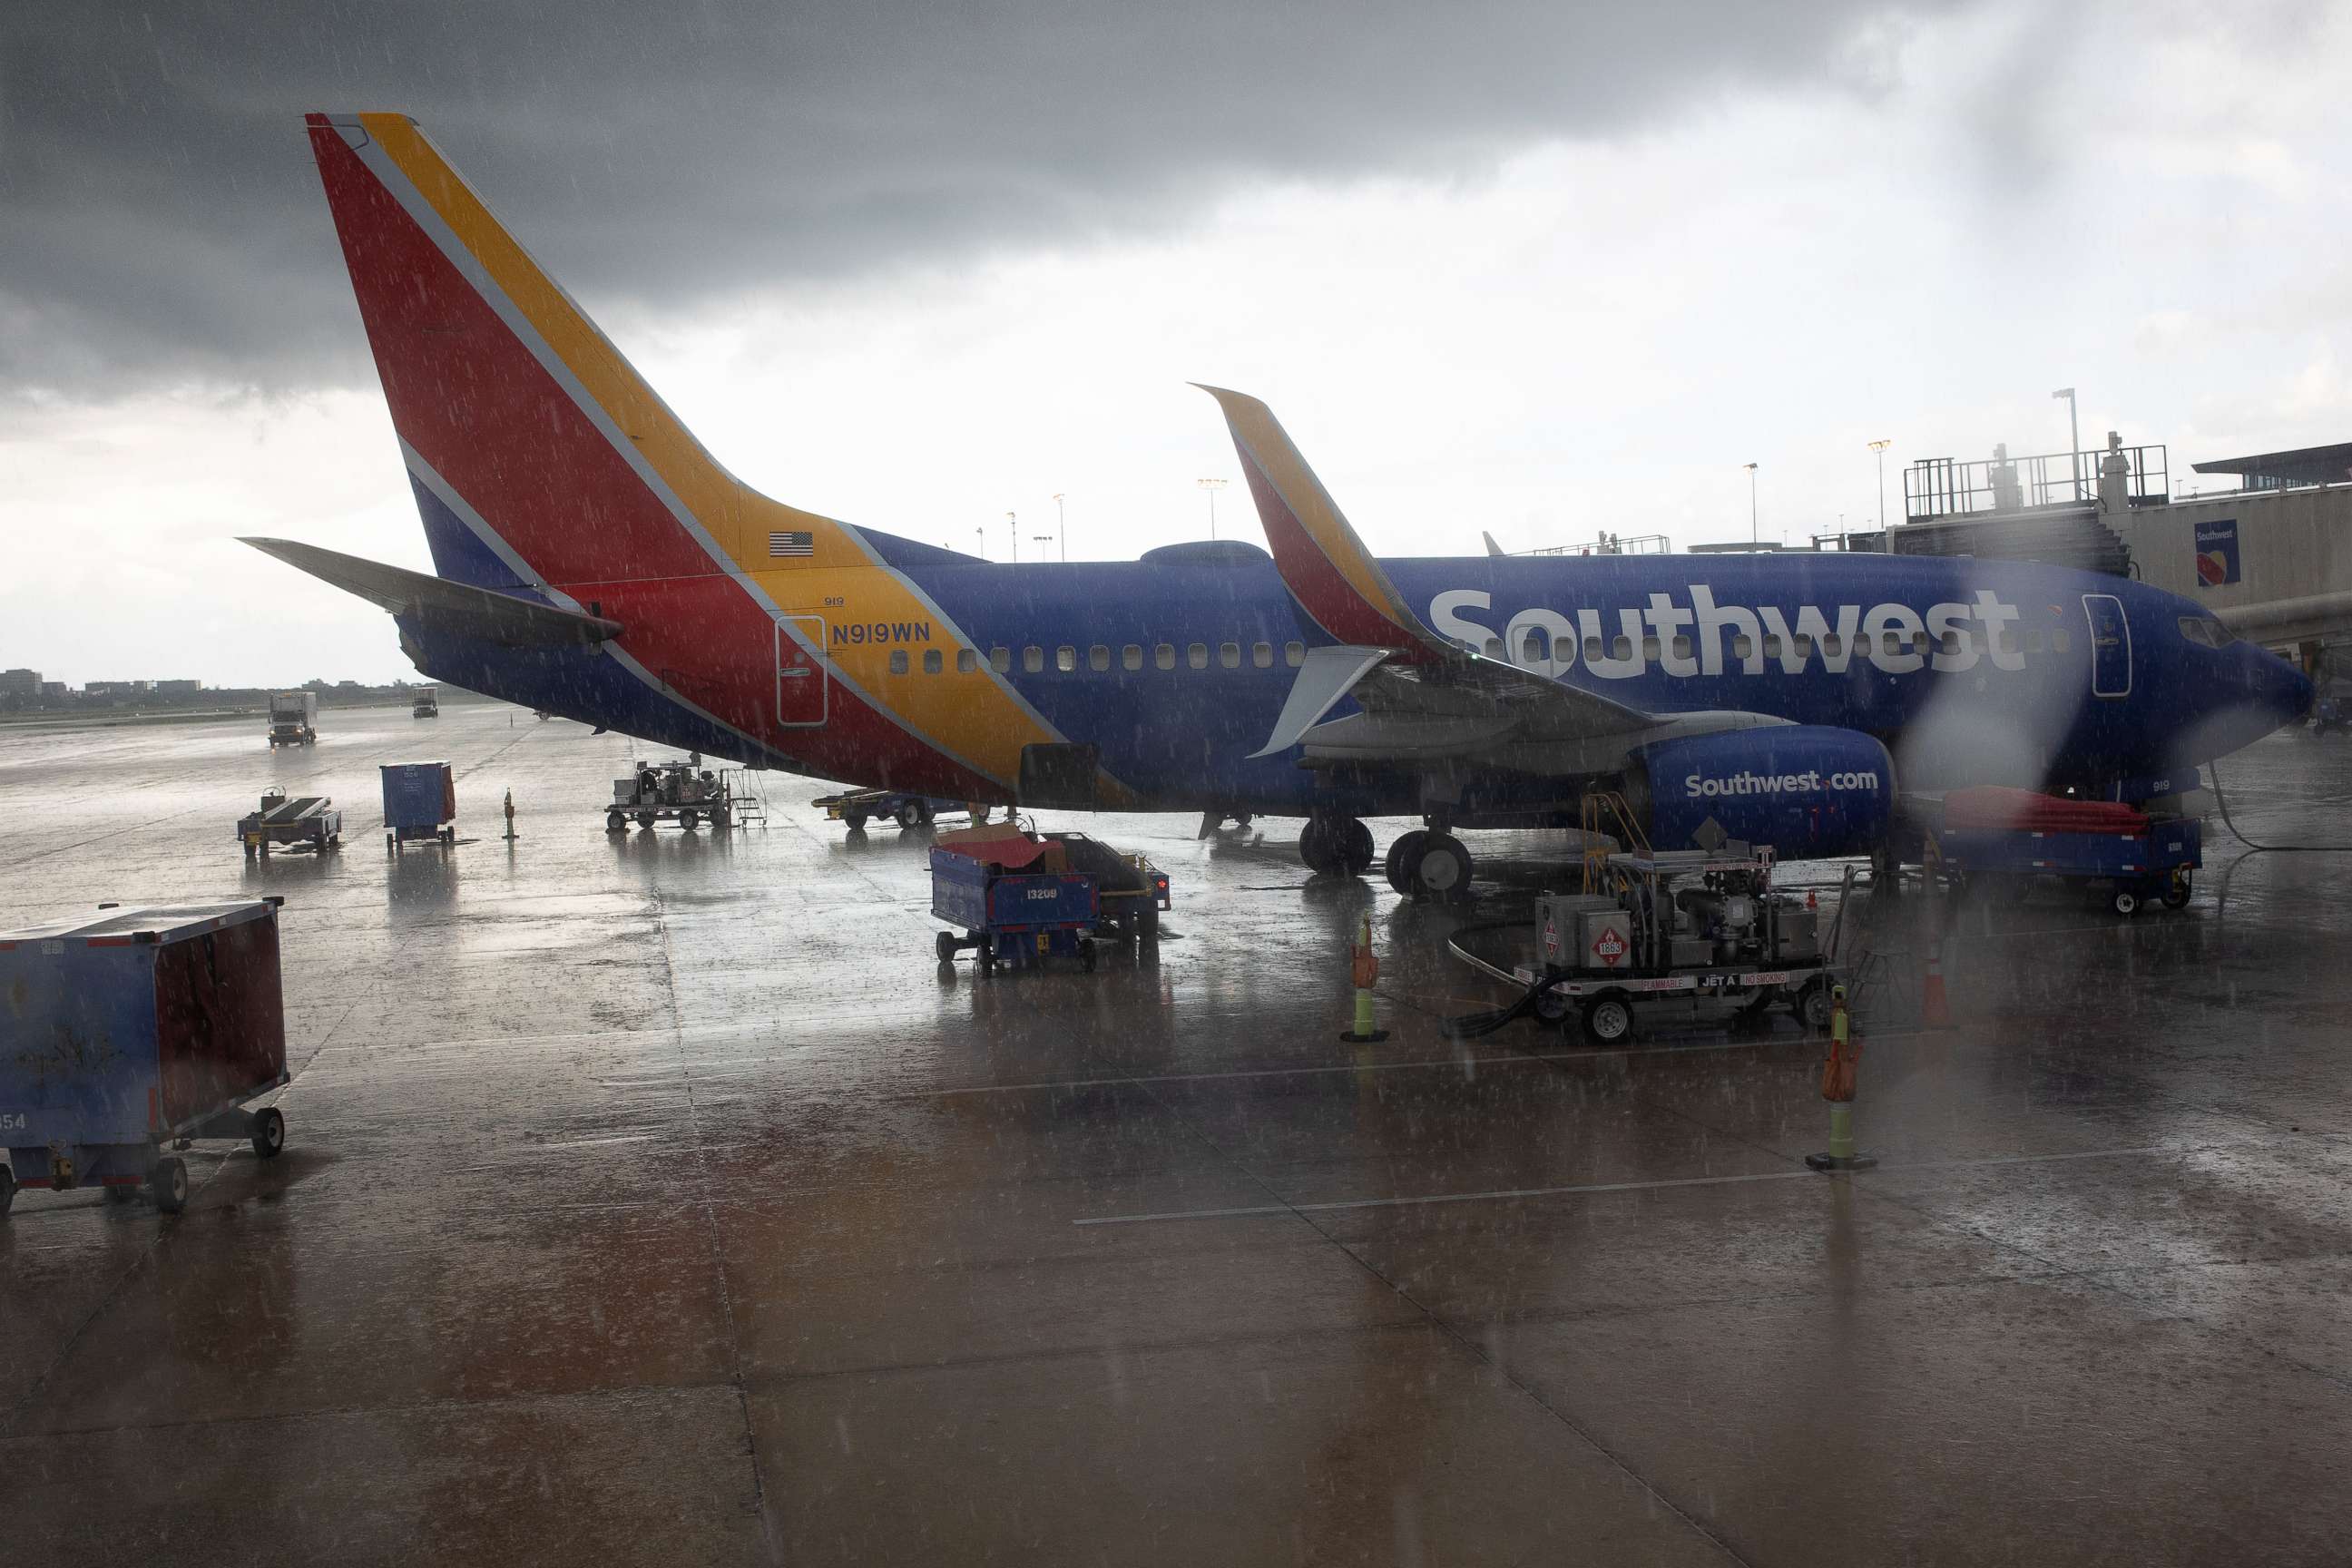 PHOTO: A Southwest Airlines plane prepares for departure on July 1, 2021, at the Tampa International Airport in Tampa, Fla.